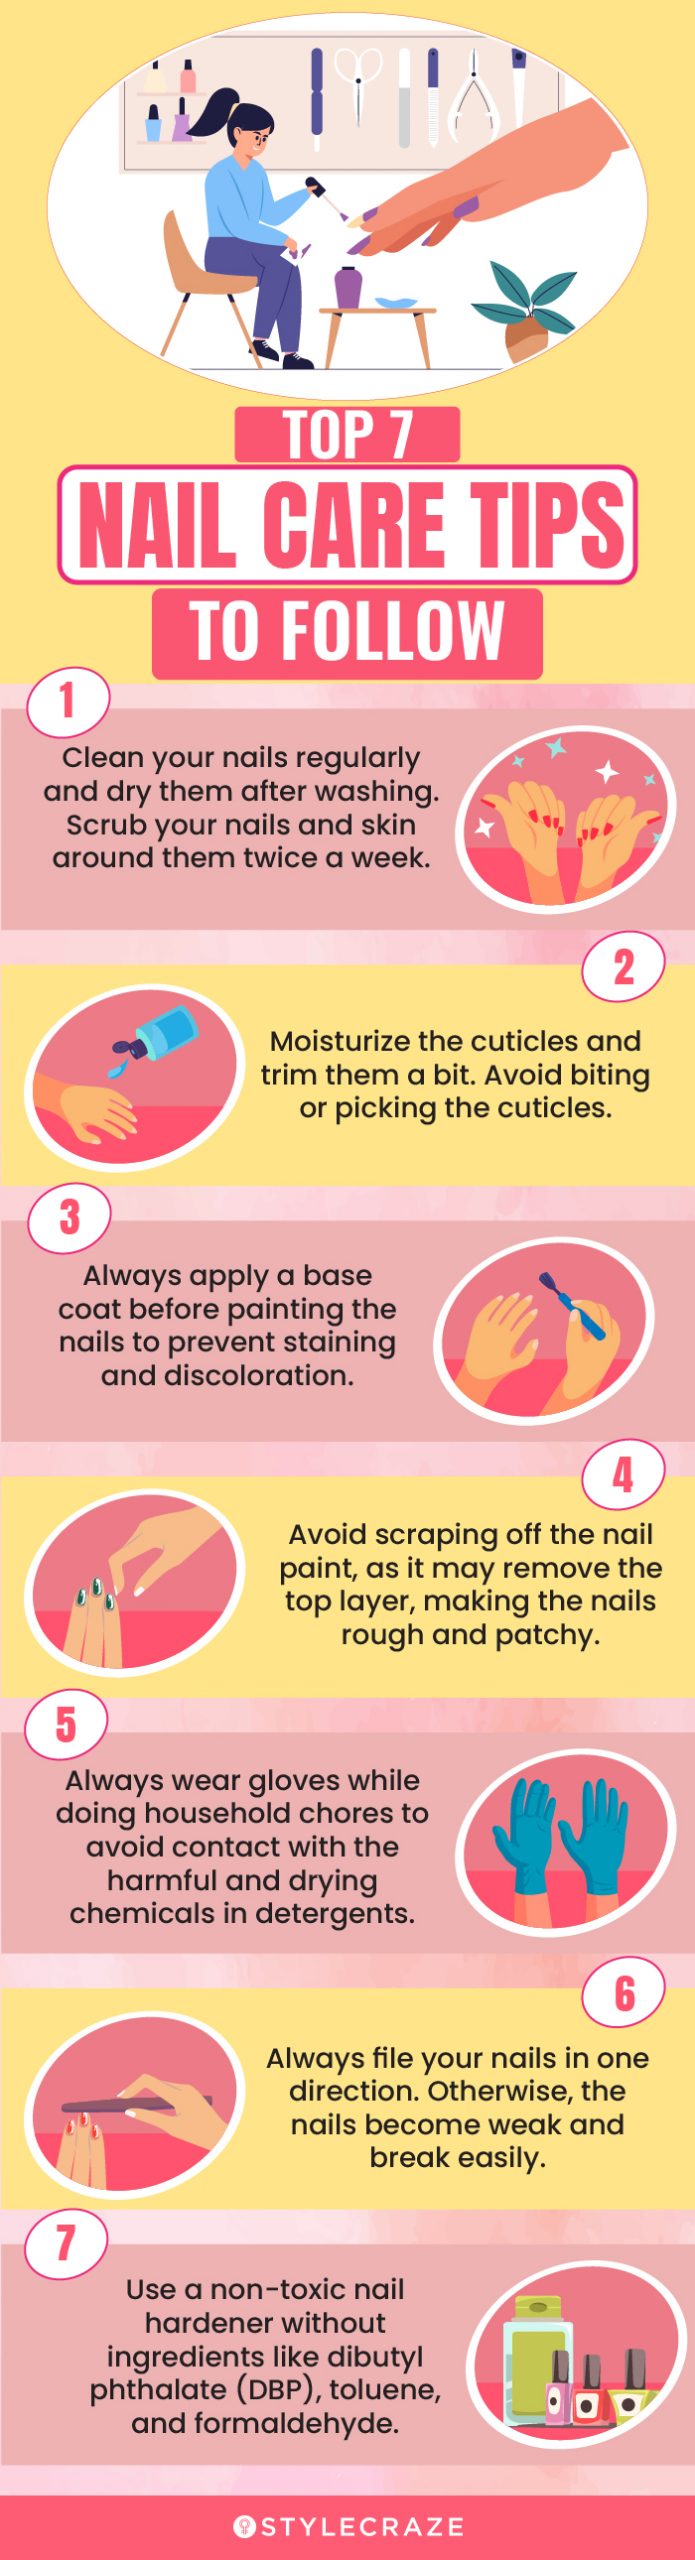 top 7 nail care tips to follow (infographic)